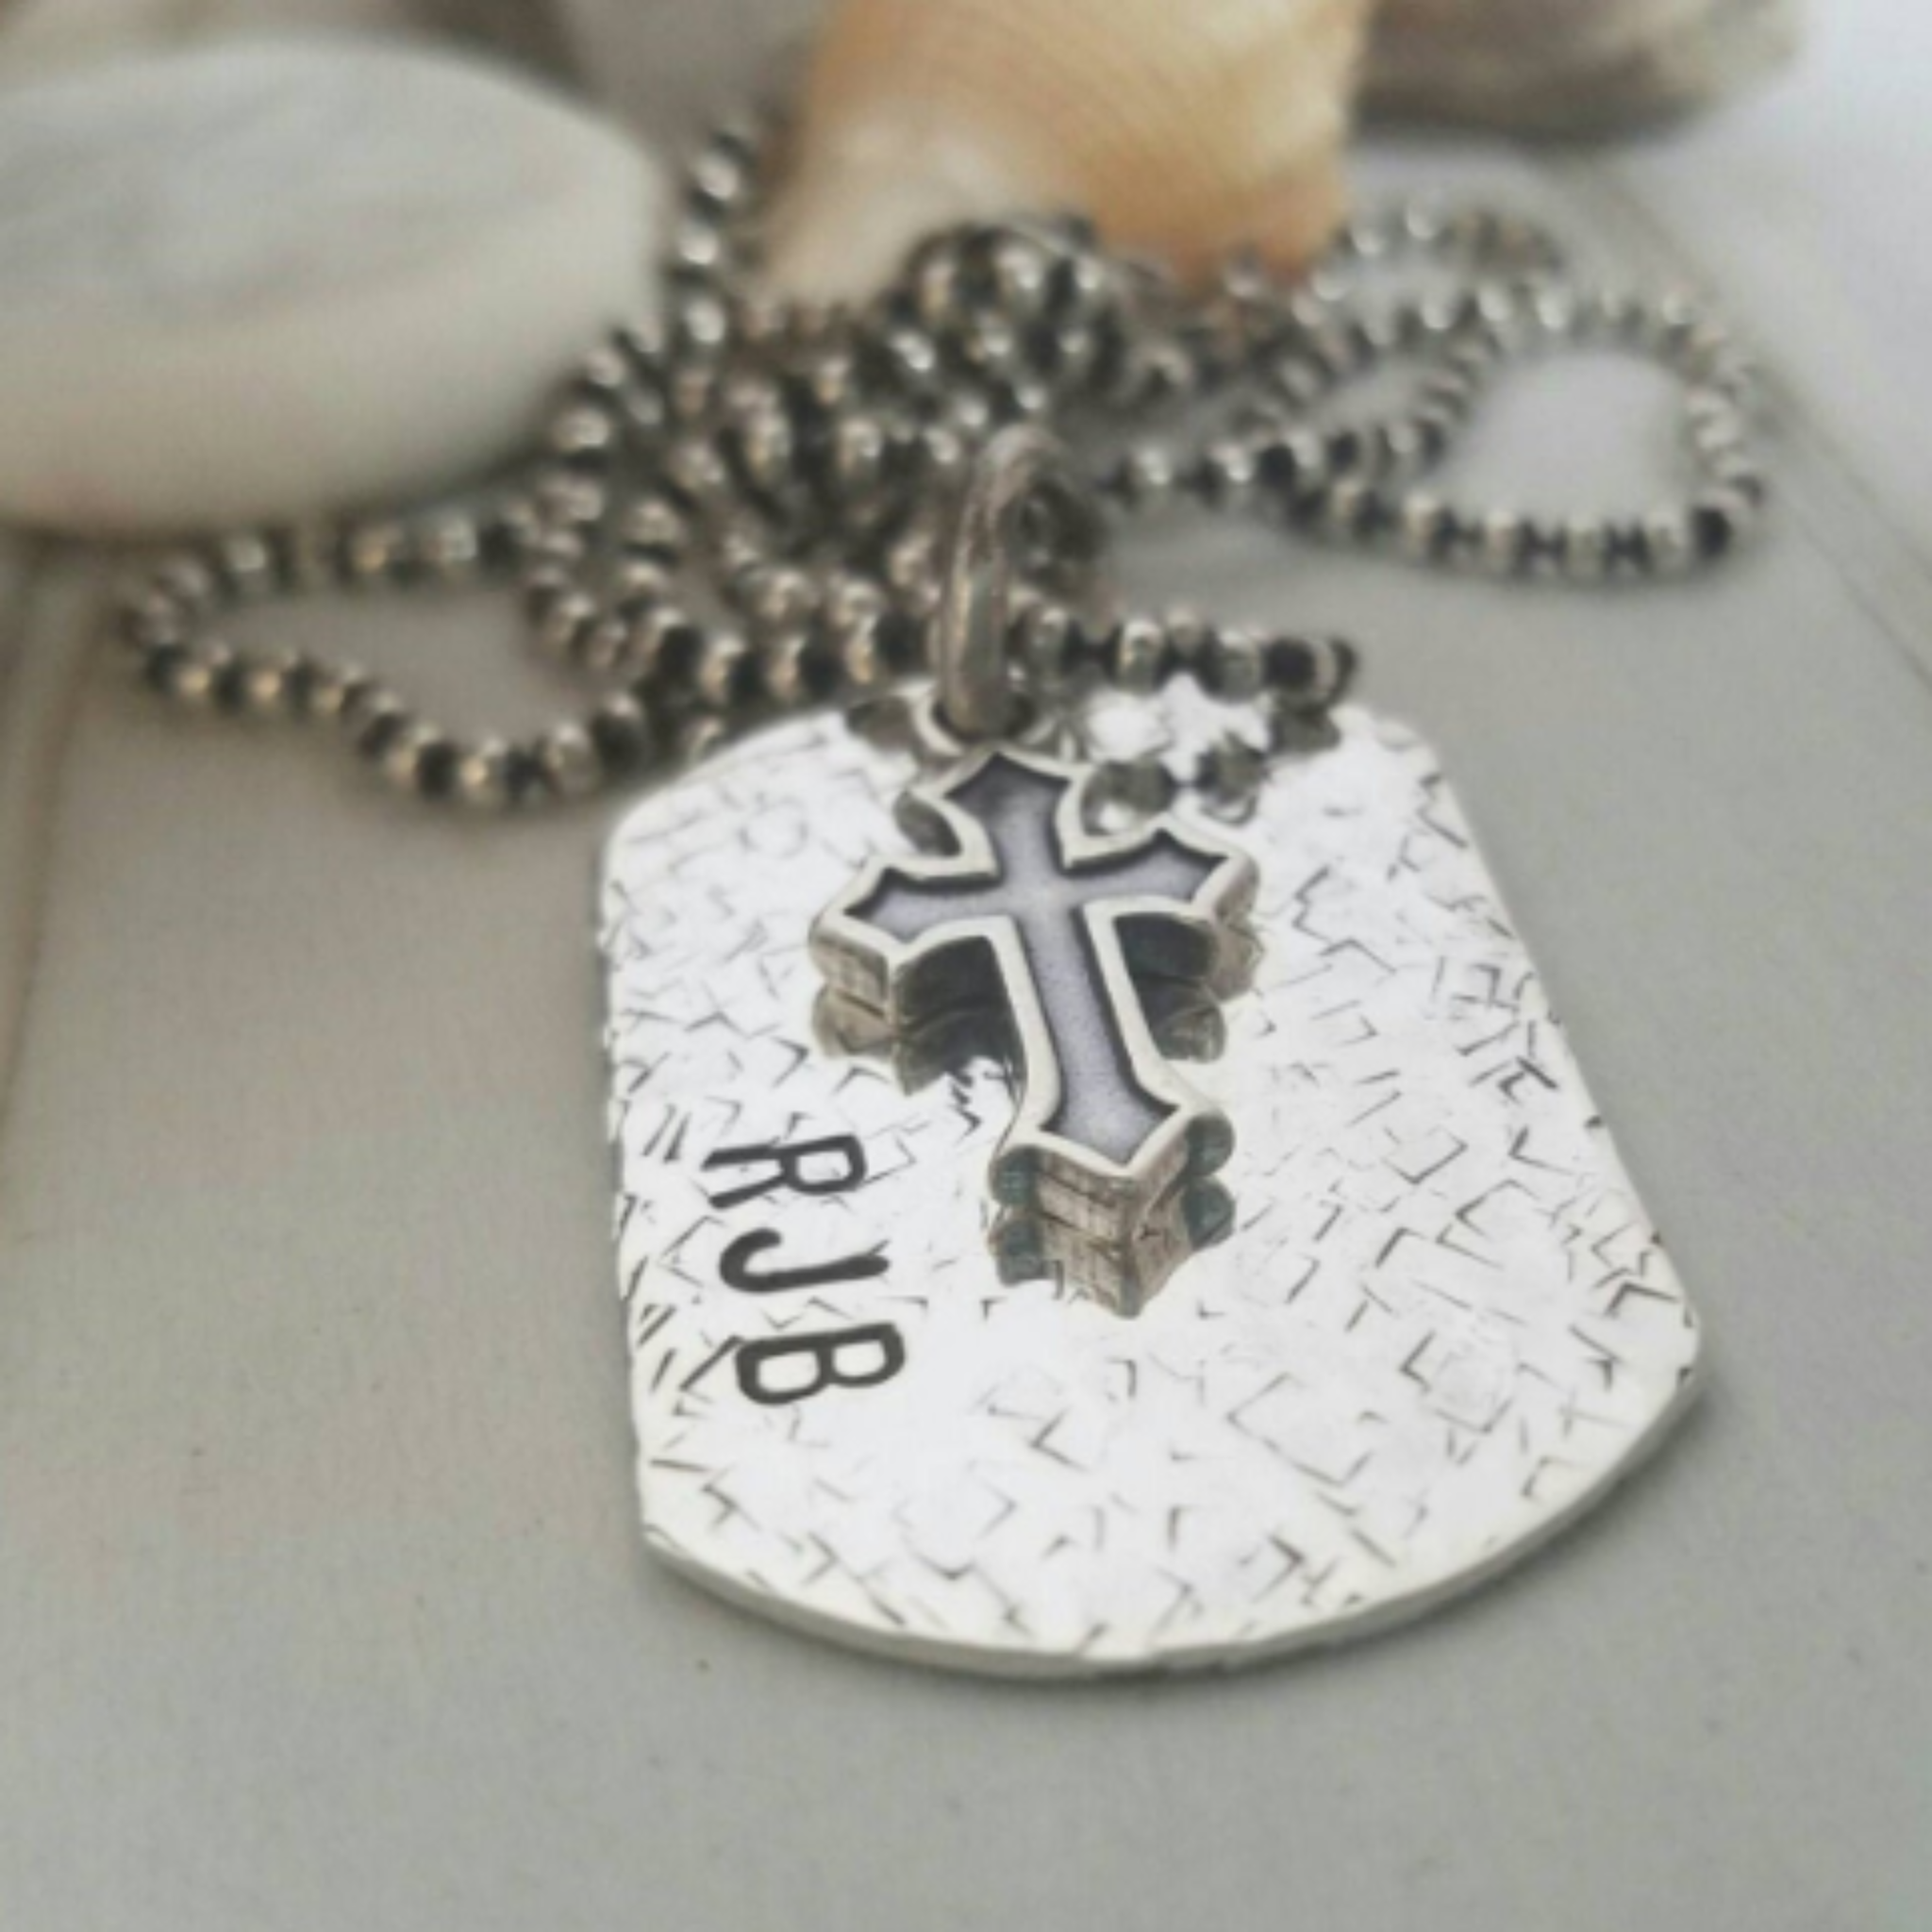 Children's Custom Dog Tag Necklace - Sterling Silver